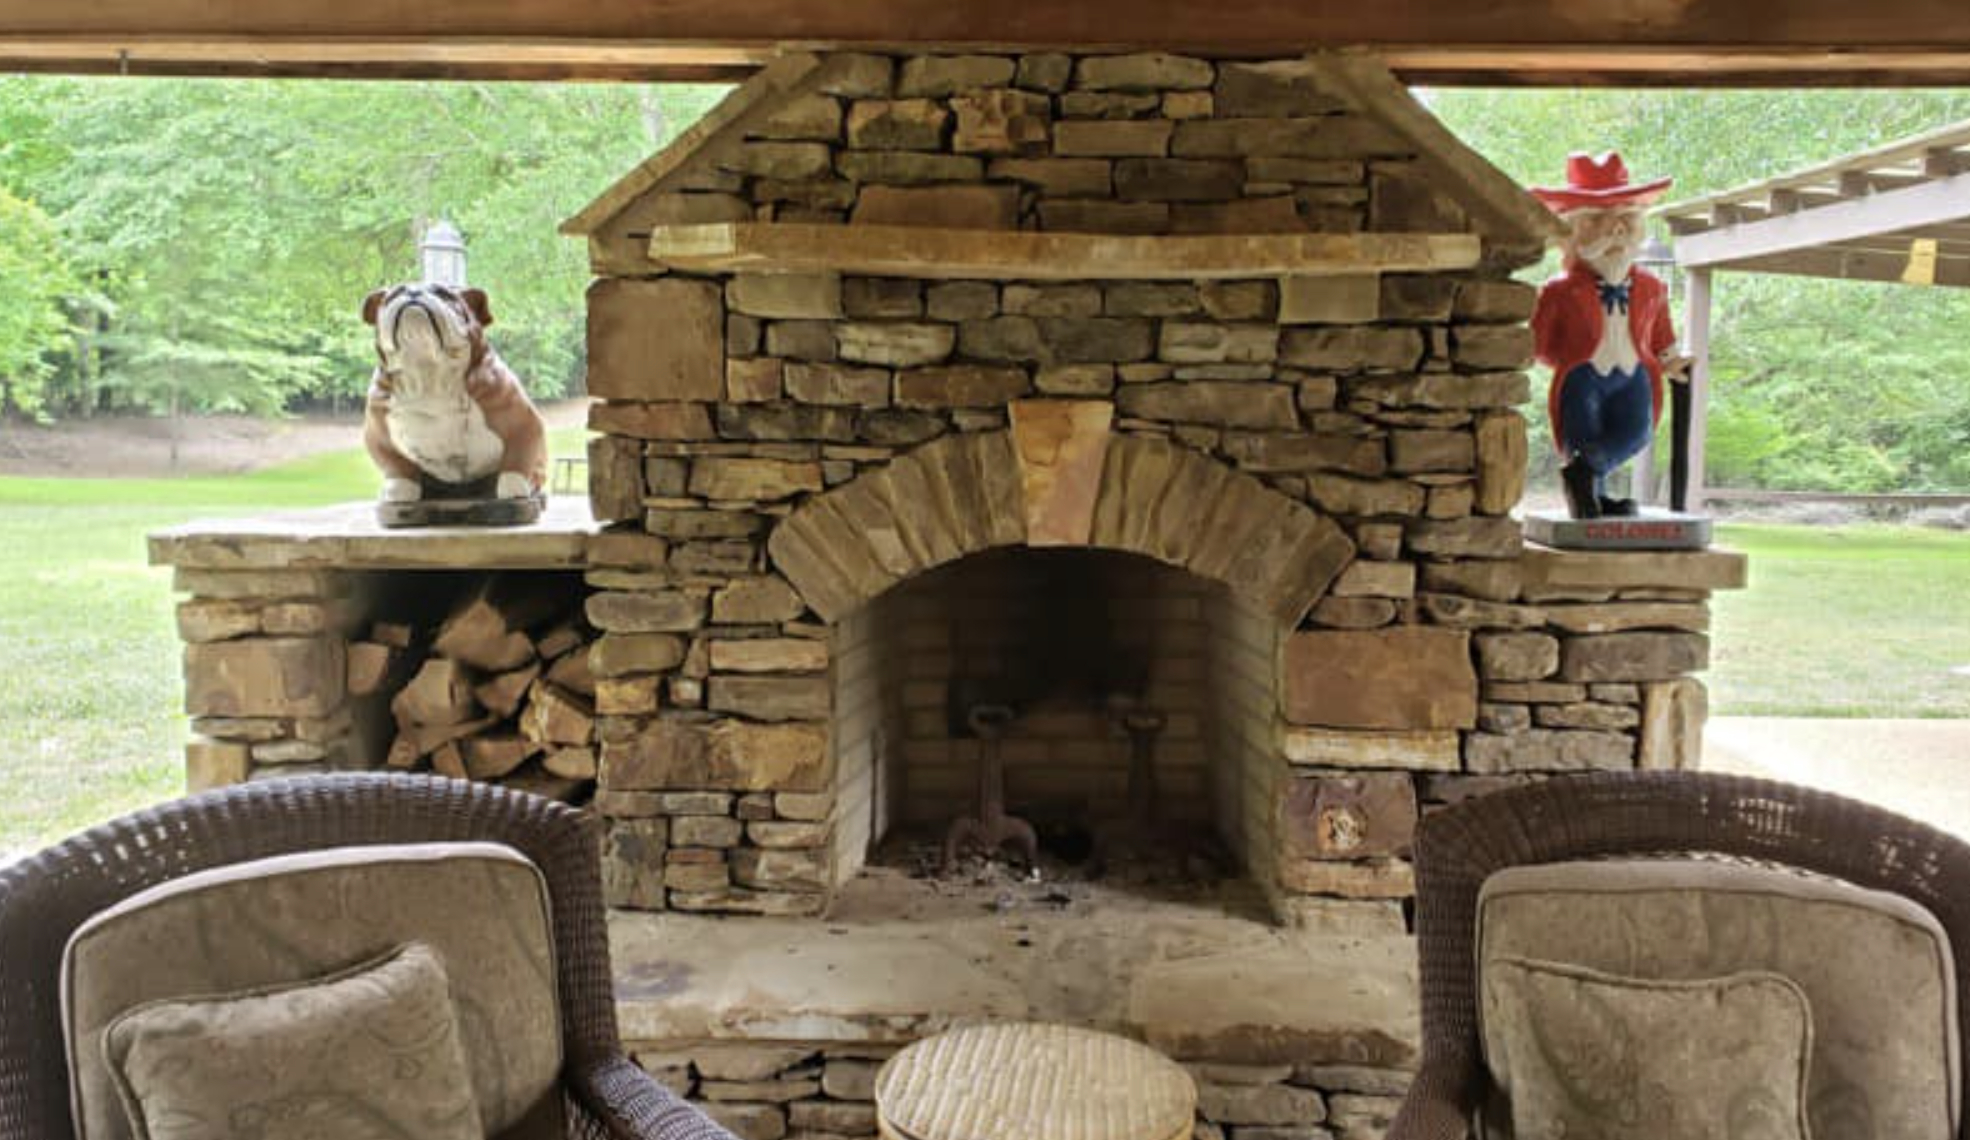 this image shows fireplace in Chino Hills, California